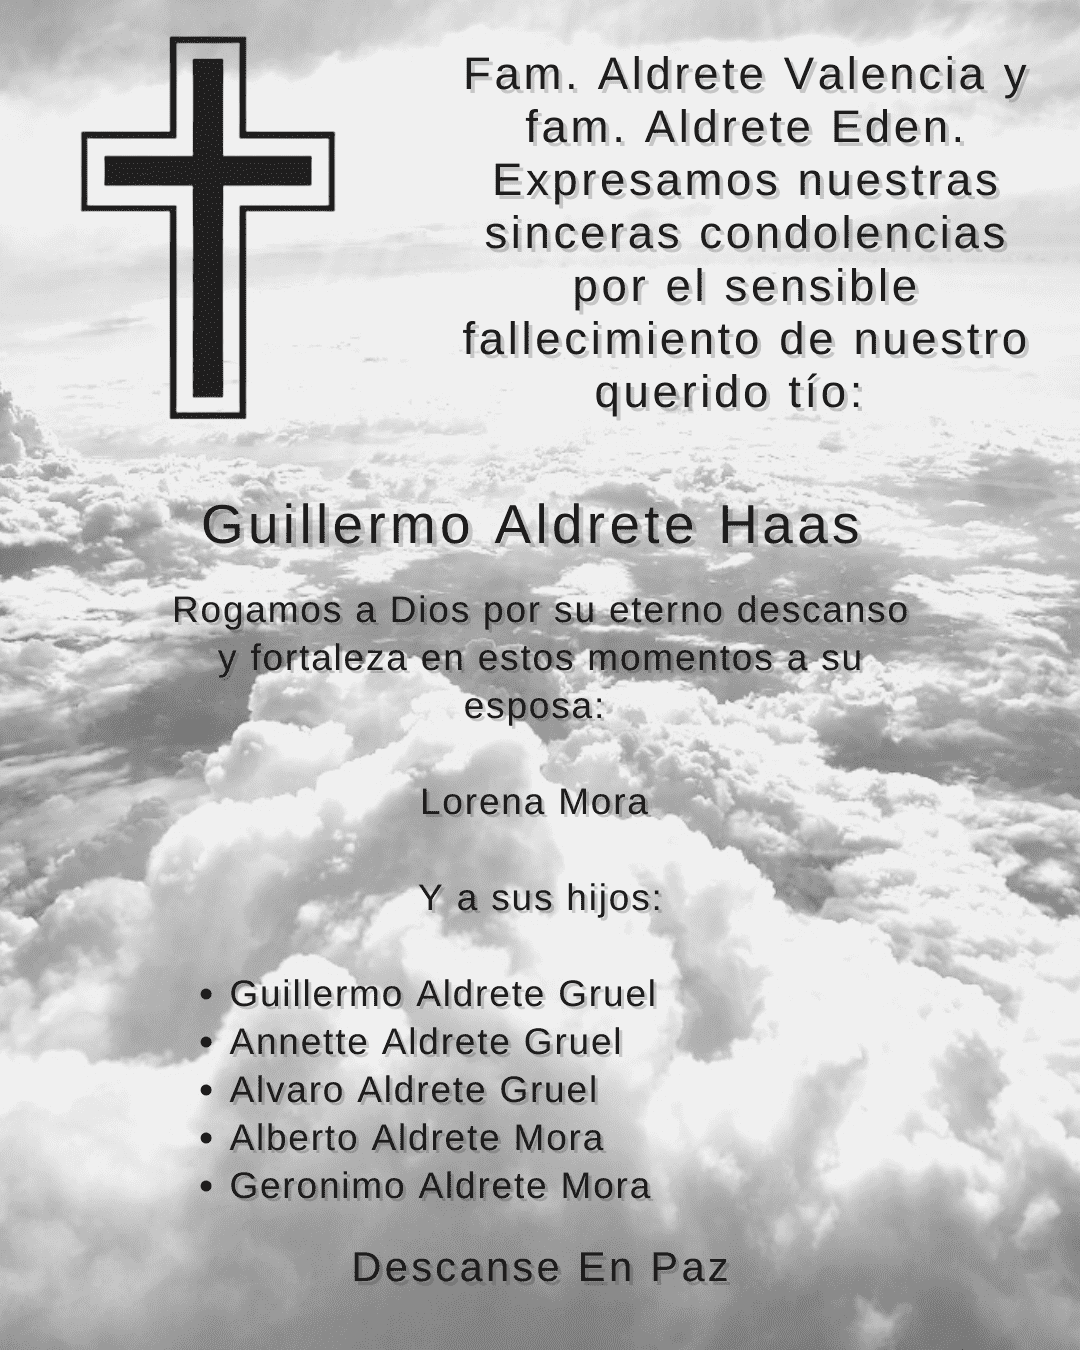 Ing. Guillermo Aldrete Haas